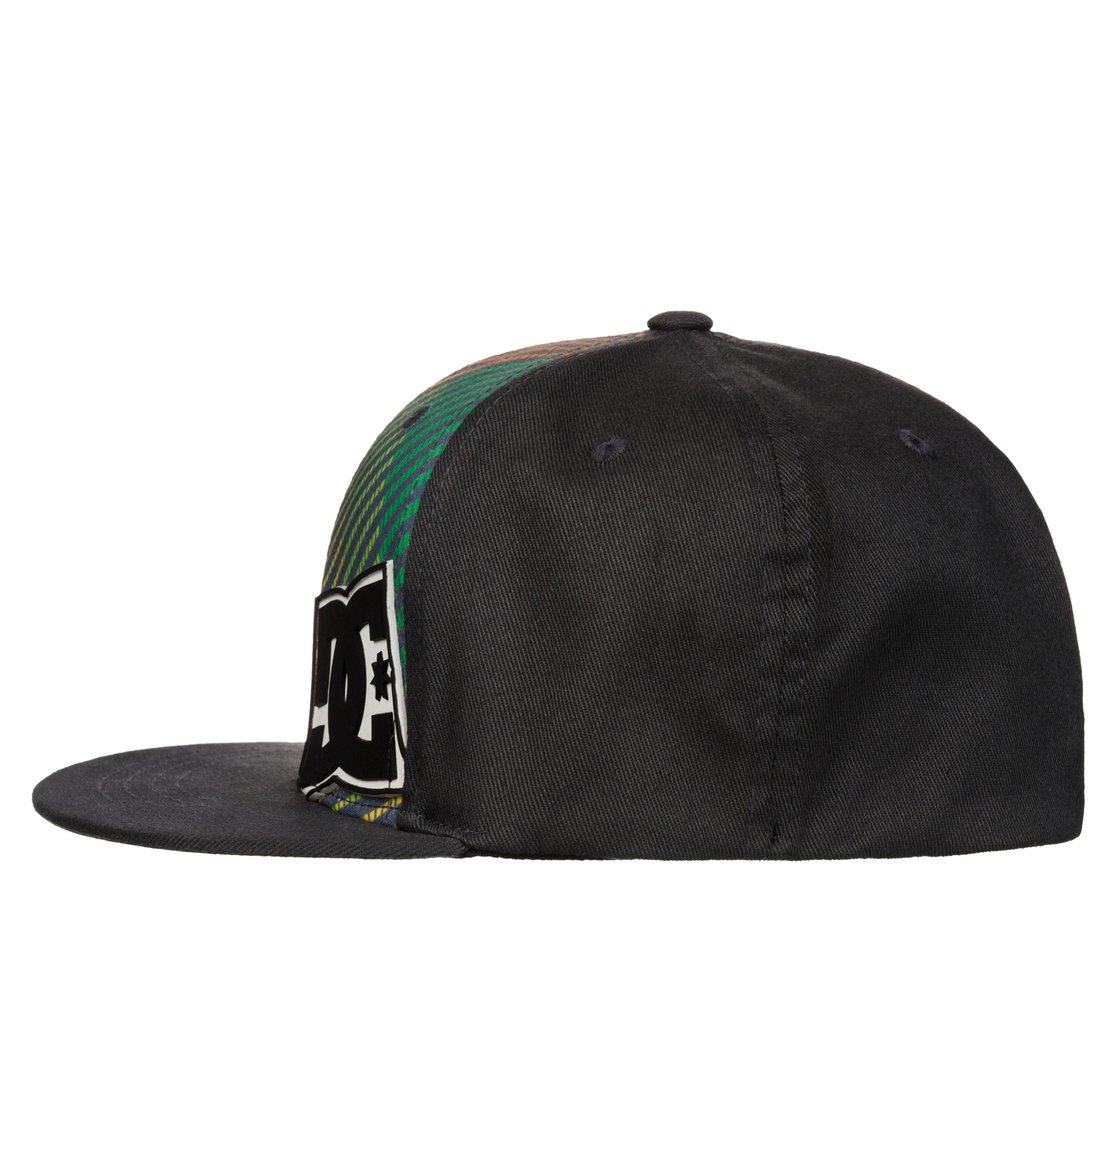 Boy's Whoops Hat ADBHA00046 | DC Shoes